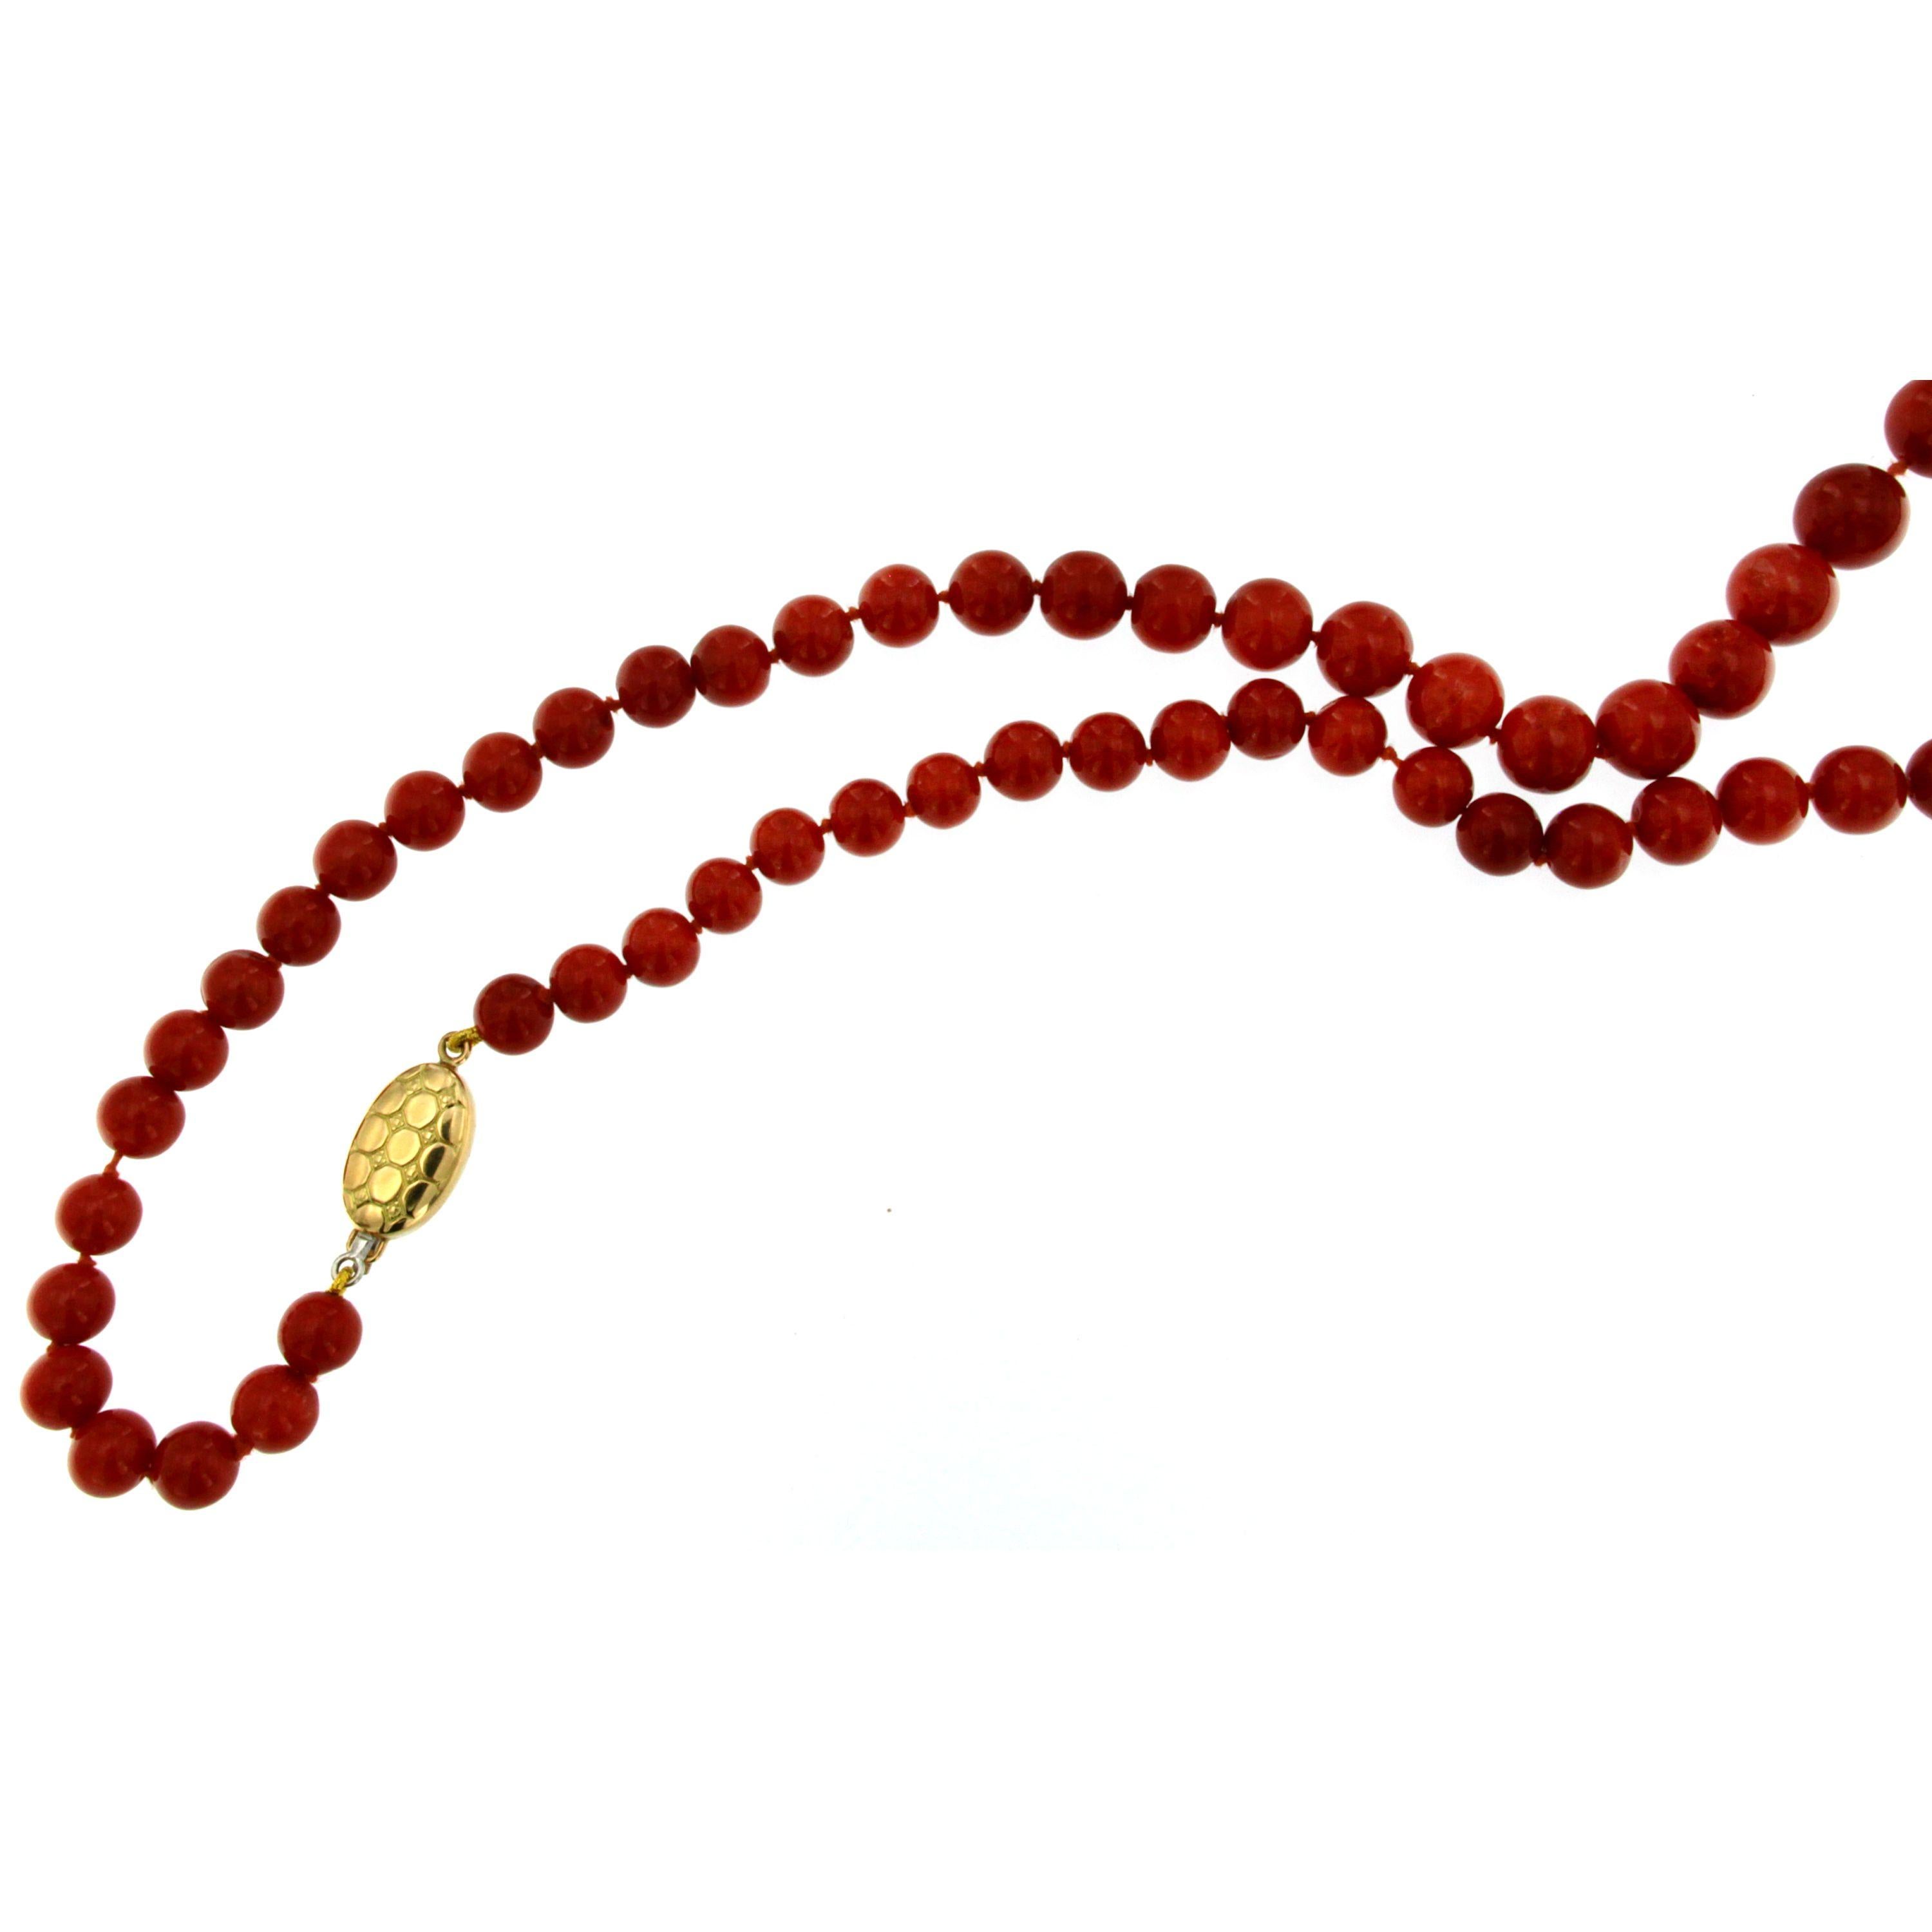 Women's 1970s Natural Mediterranean Coral Long Necklace